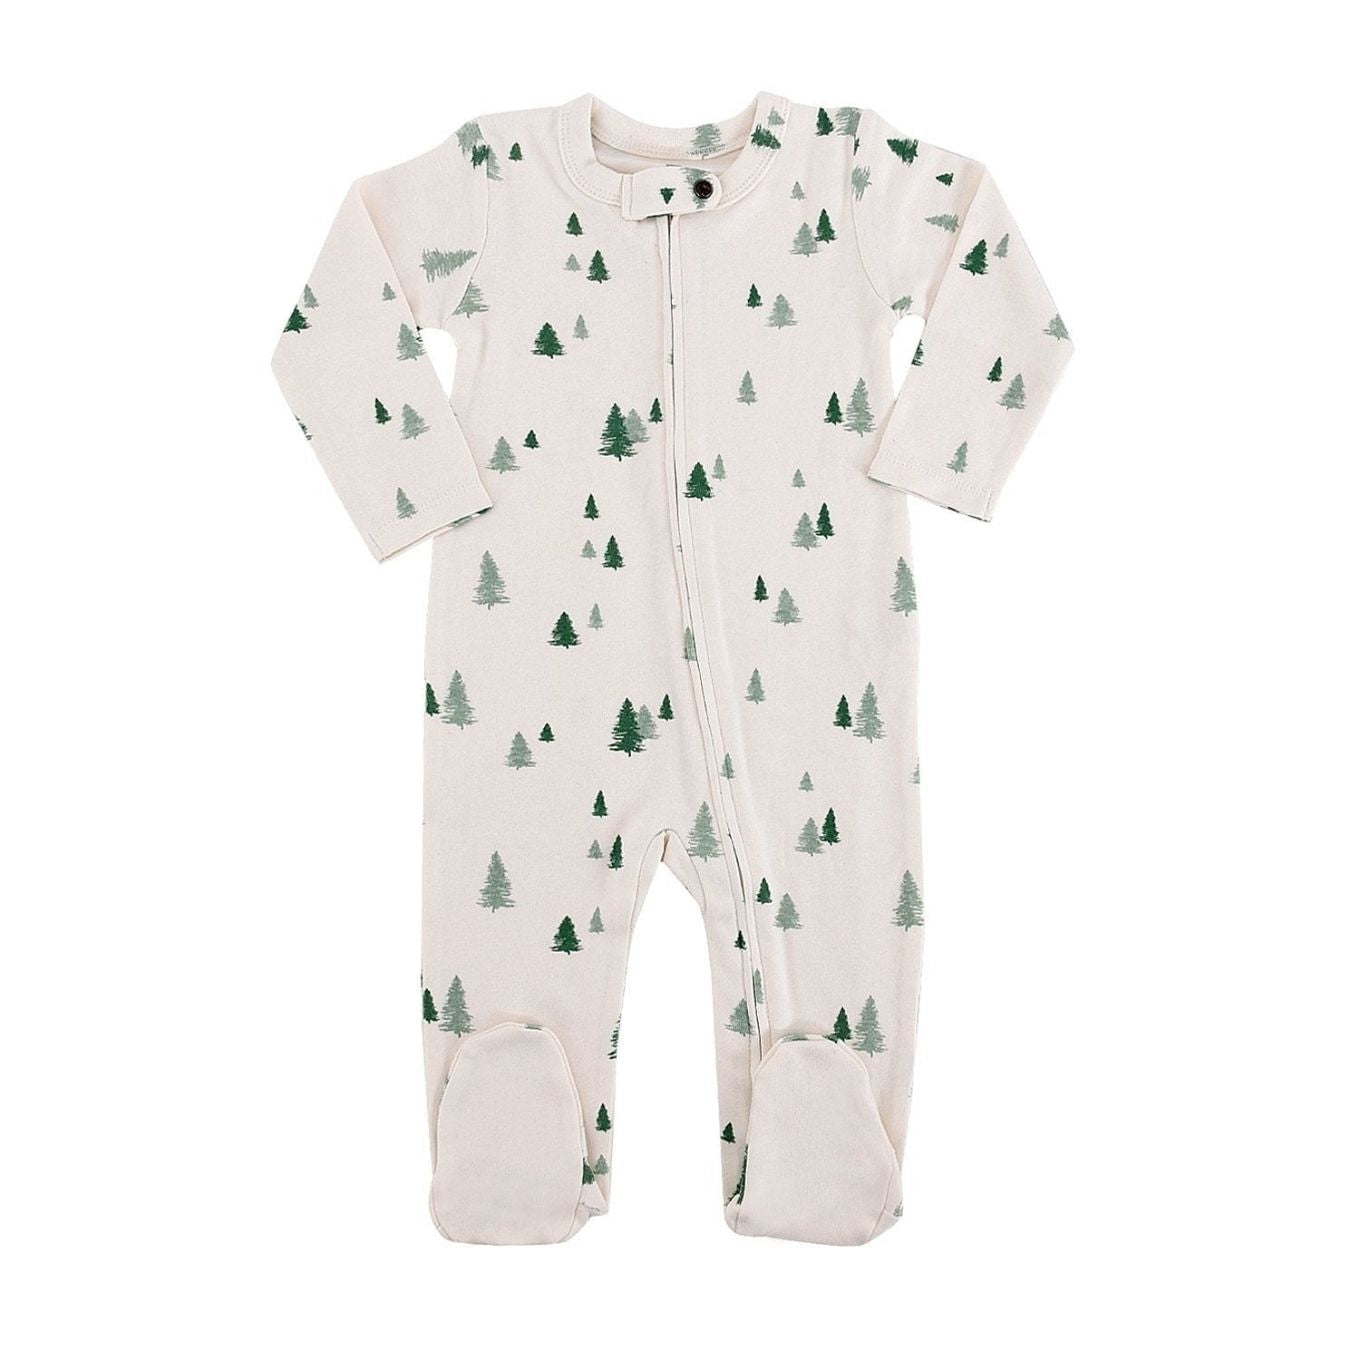 Finn and Emma Footie pajamas for babies